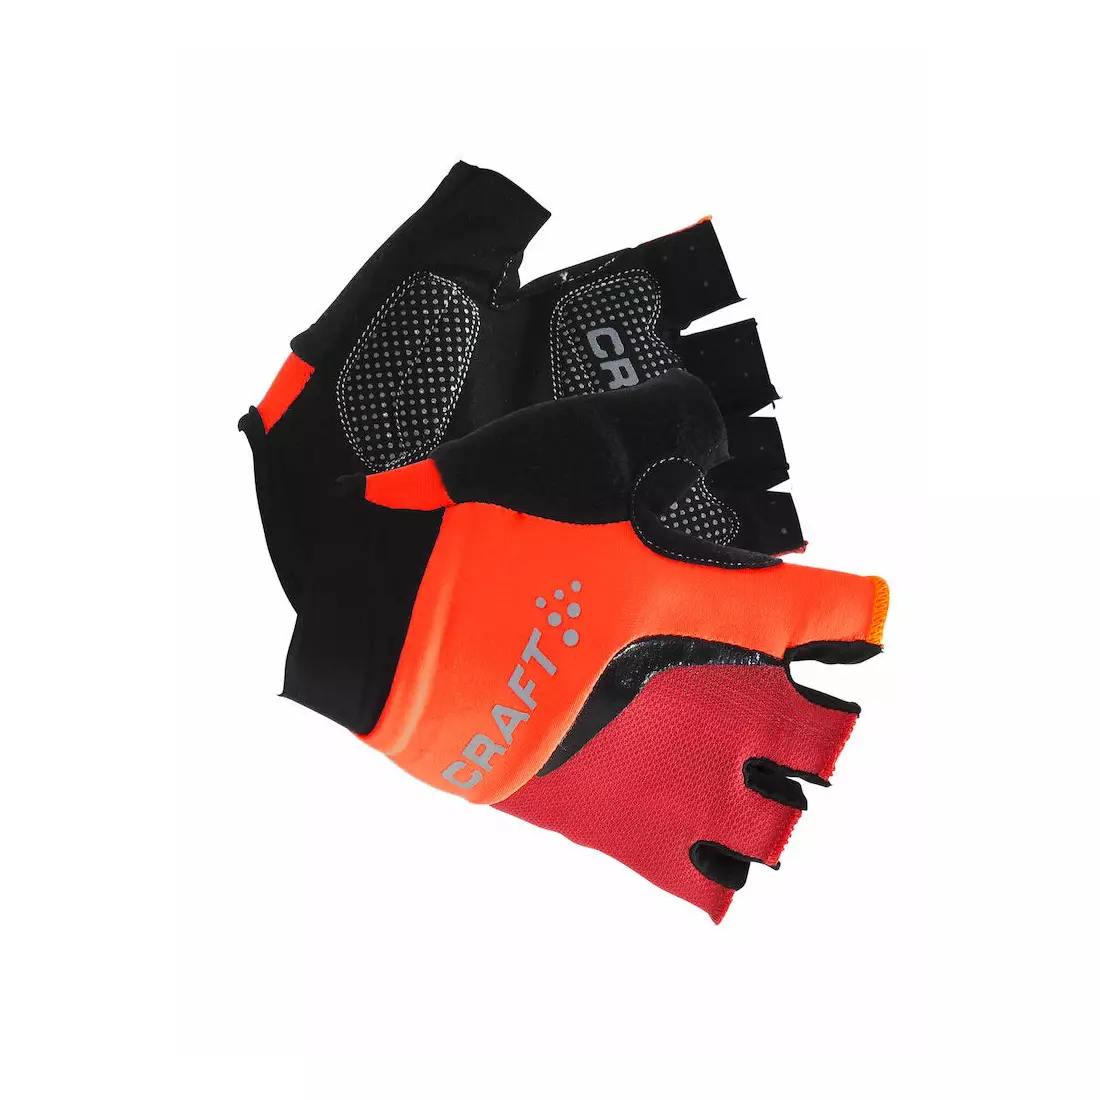 CRAFT CLASSIC GLOVE women's cycling gloves 1903305-2825